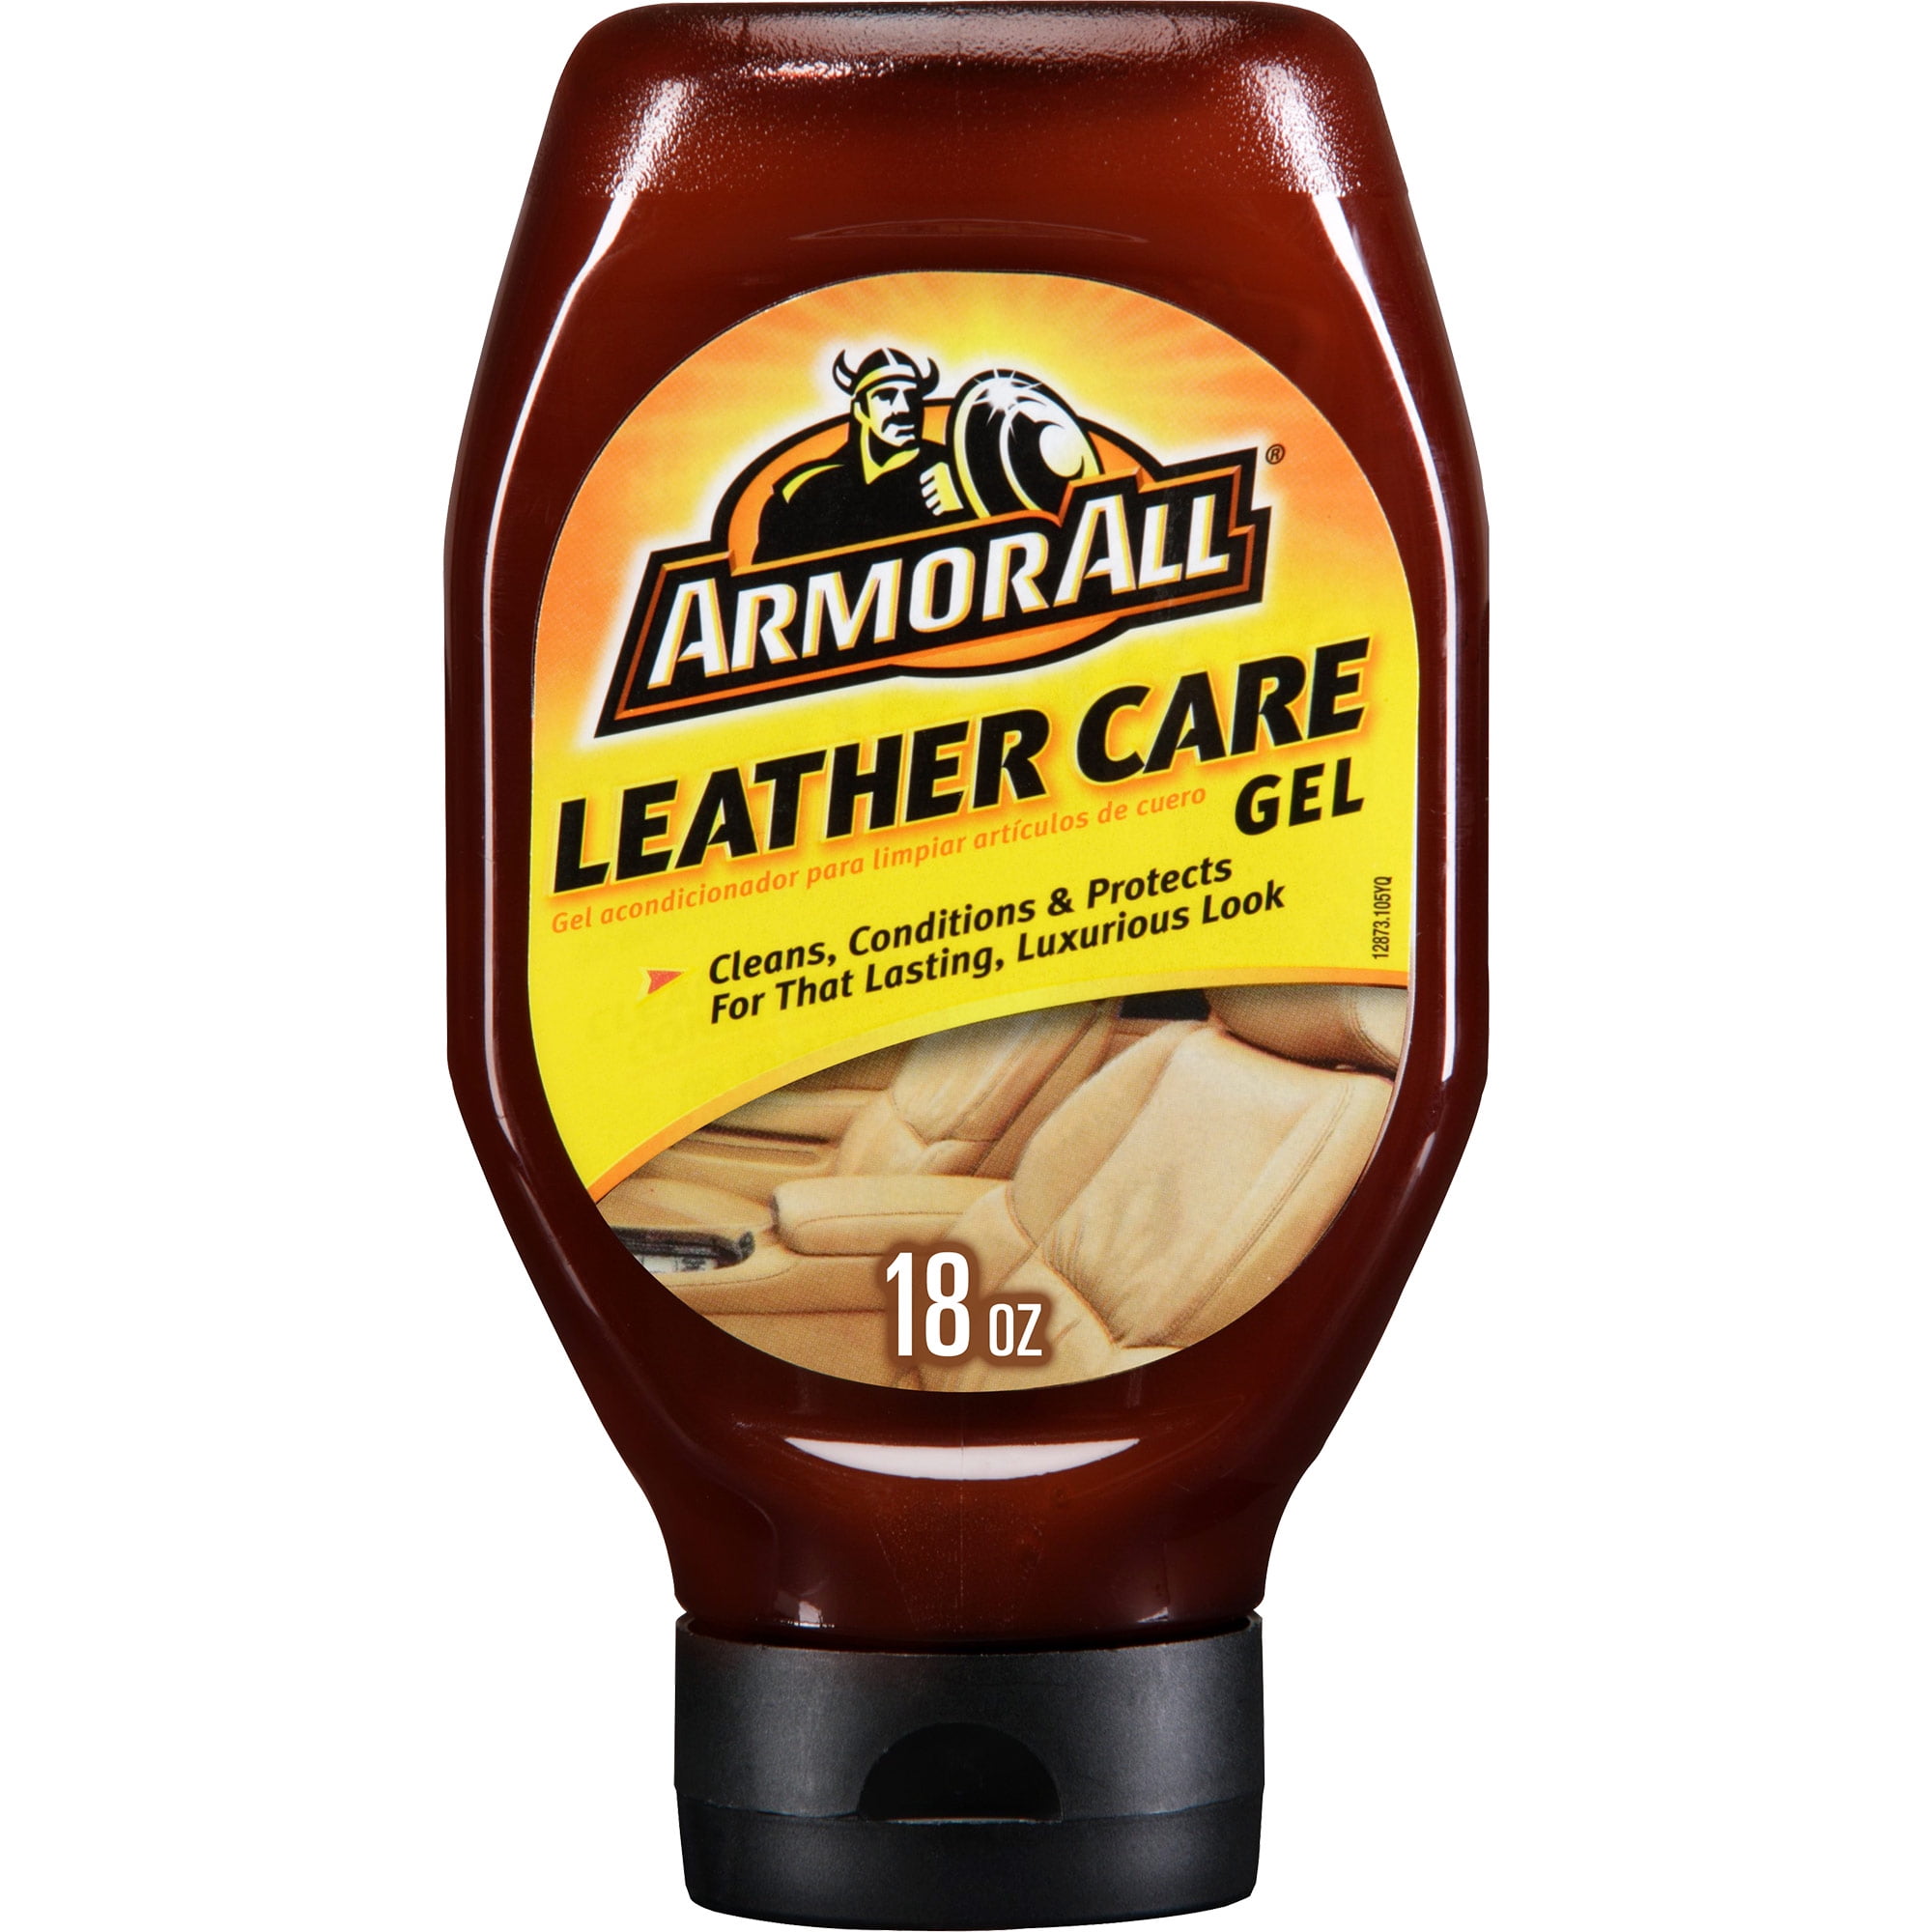 Armor All Leather Care 4 Fl Oz NEW